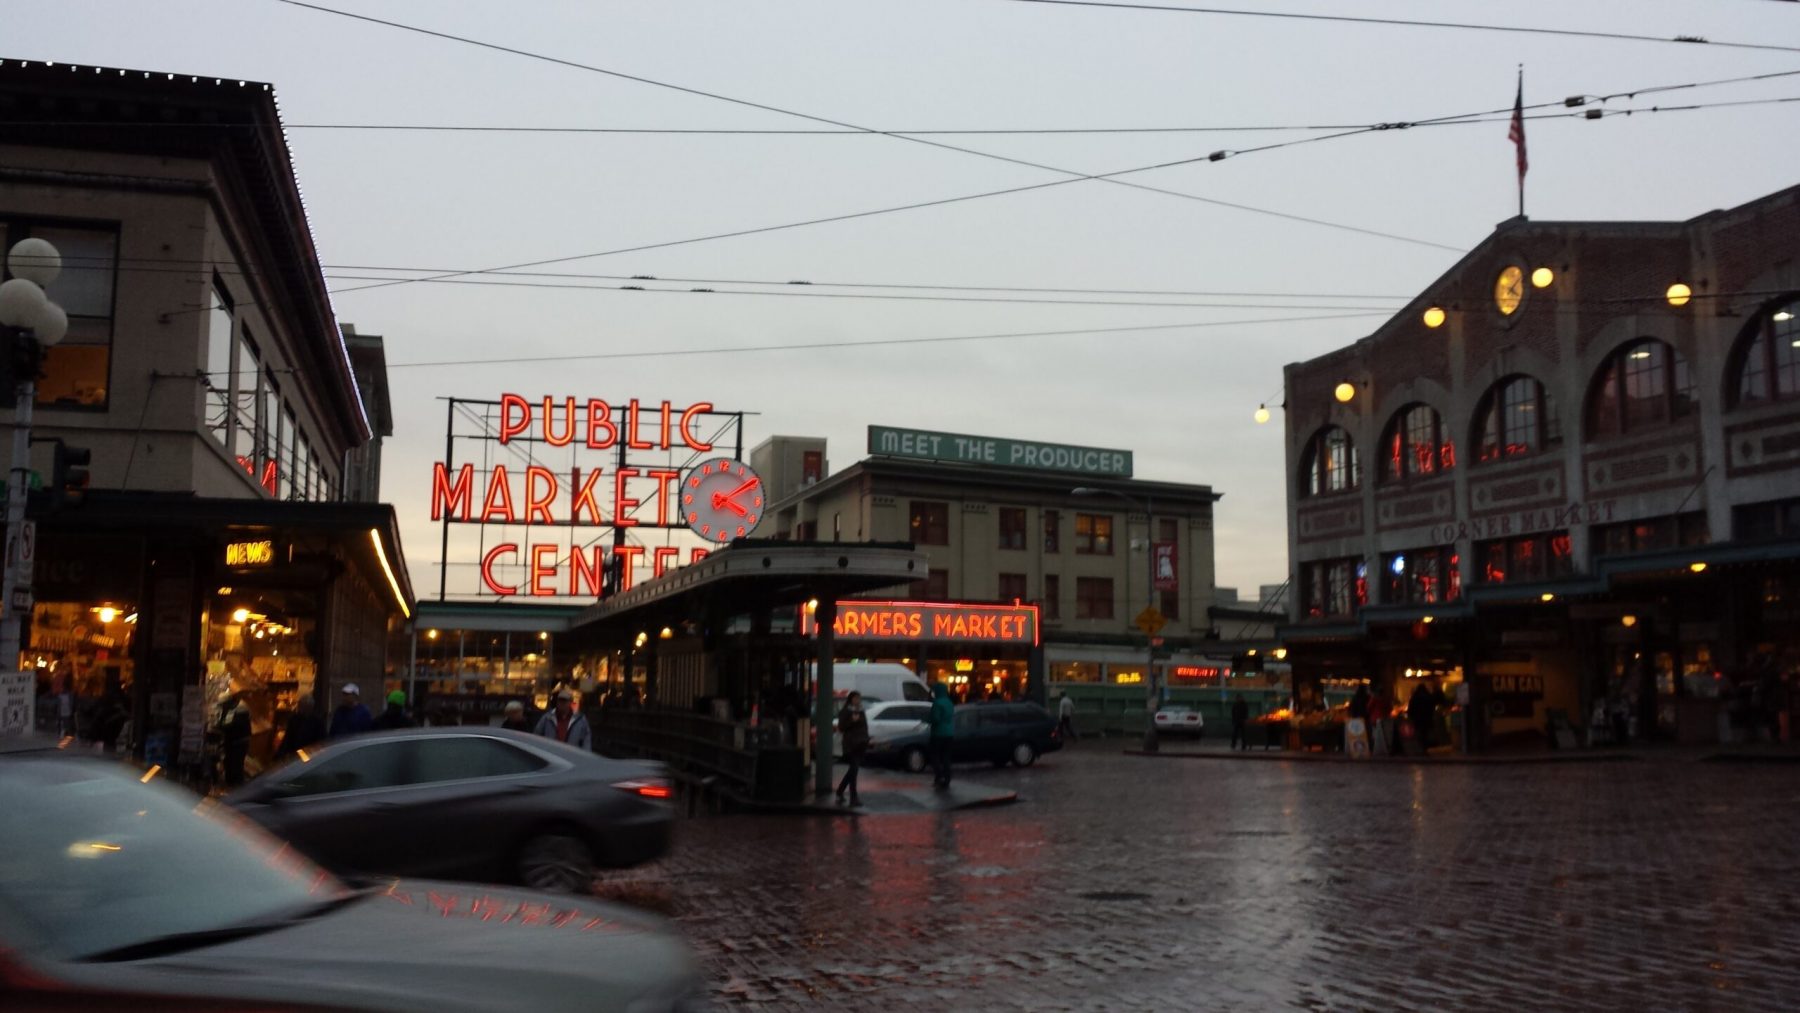 The front entrance to Pike Place Market in Seattle, WA.